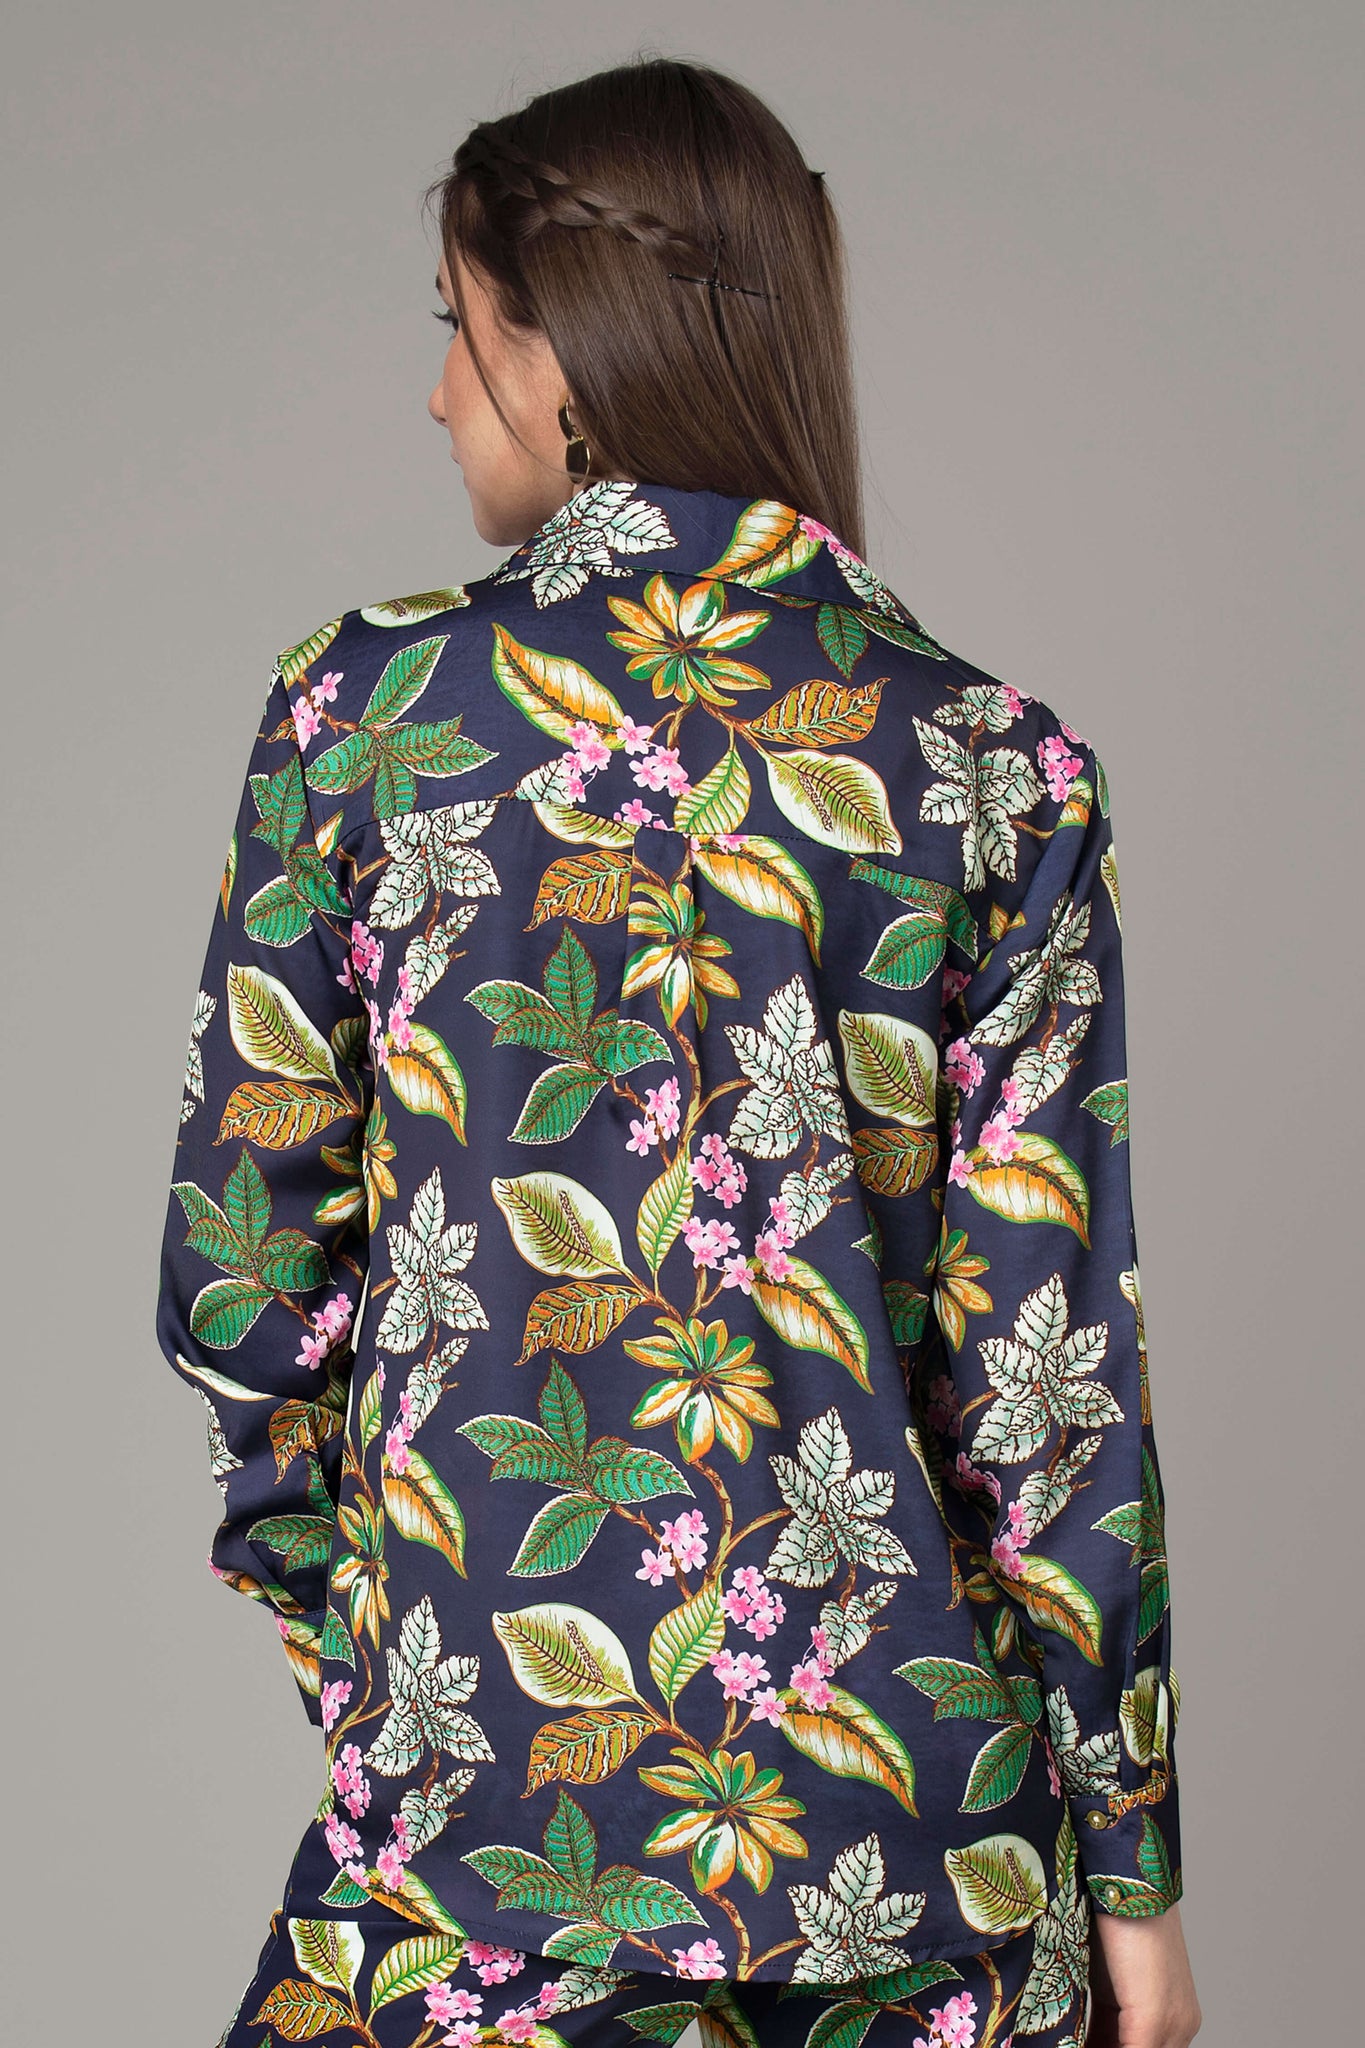 Trendy Floral Shirt For Women